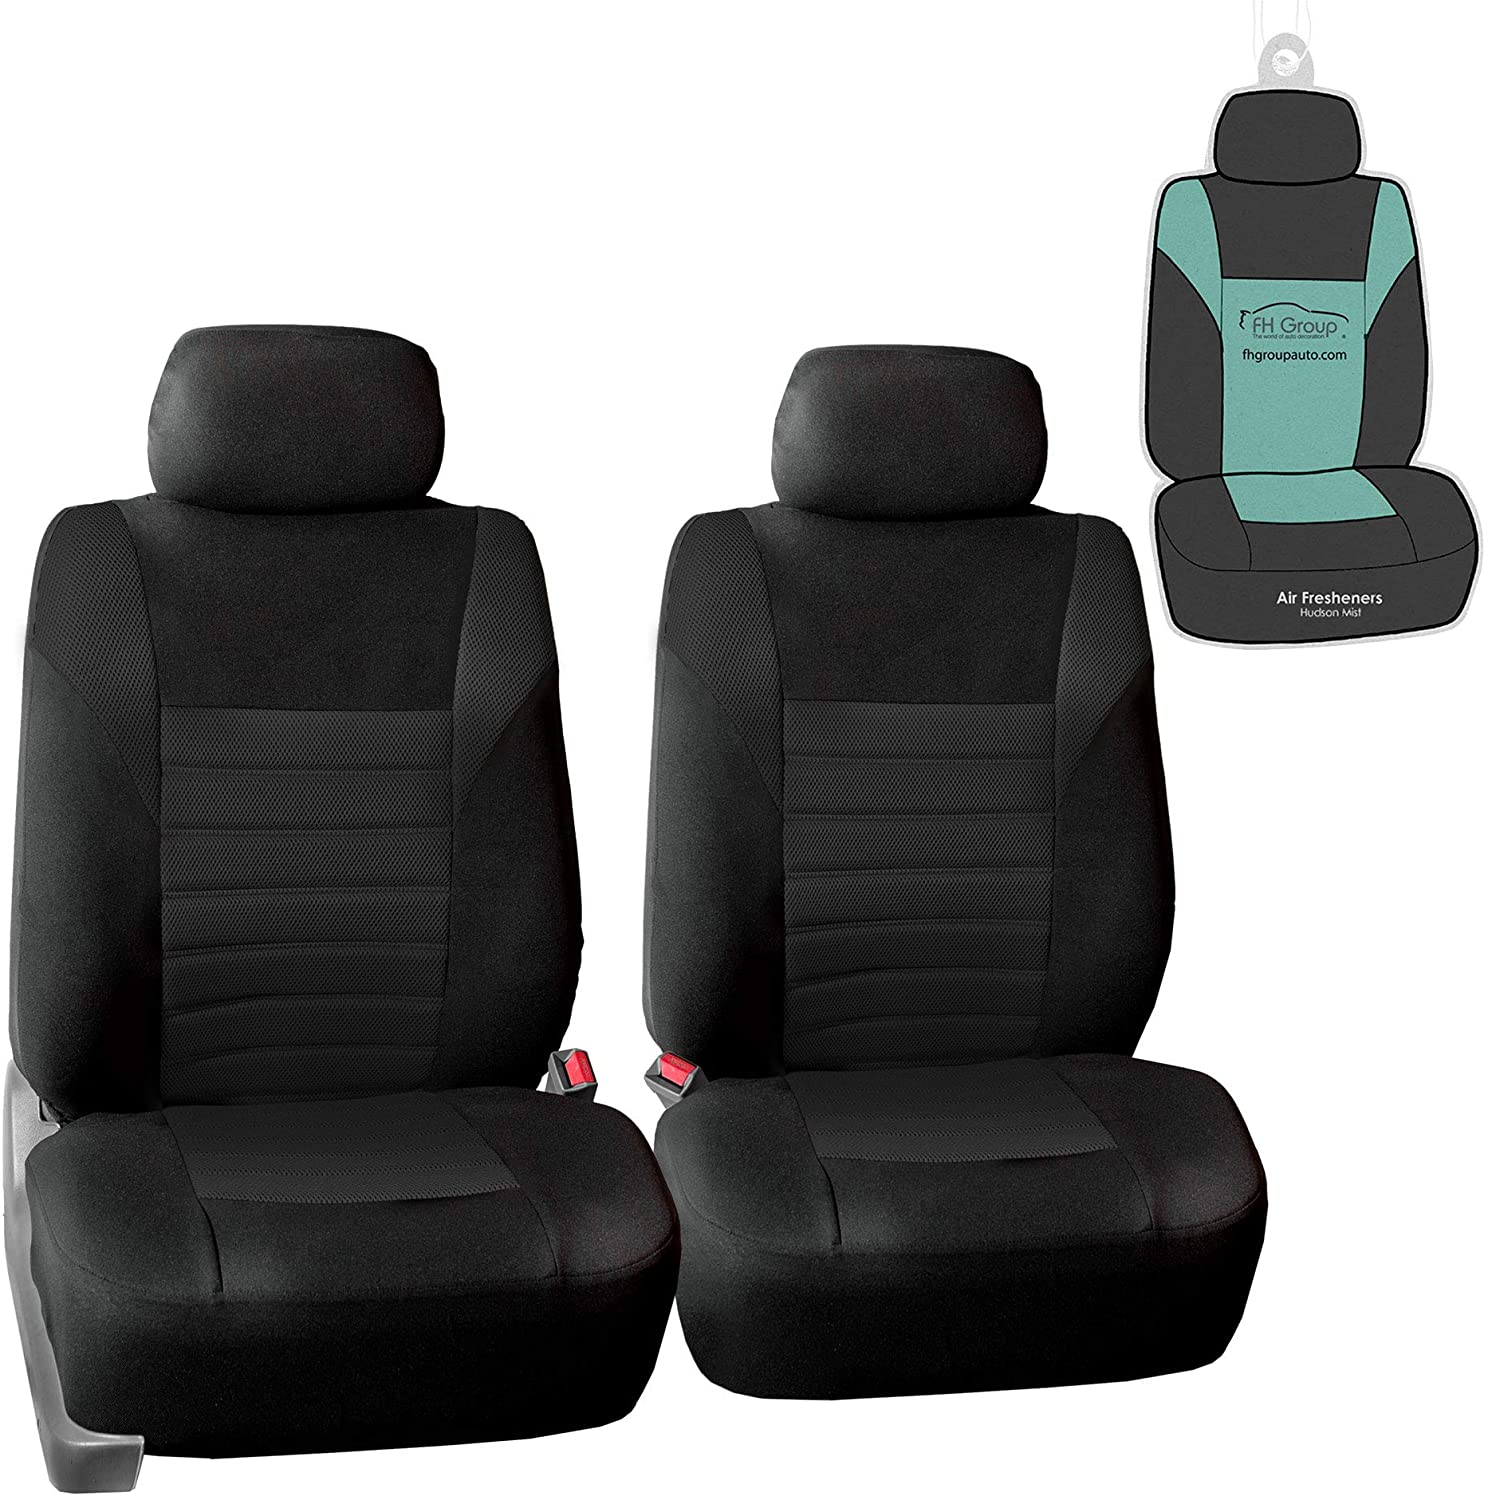 10 Best Seat Covers For Nissan Rogue Wonderful Engineering